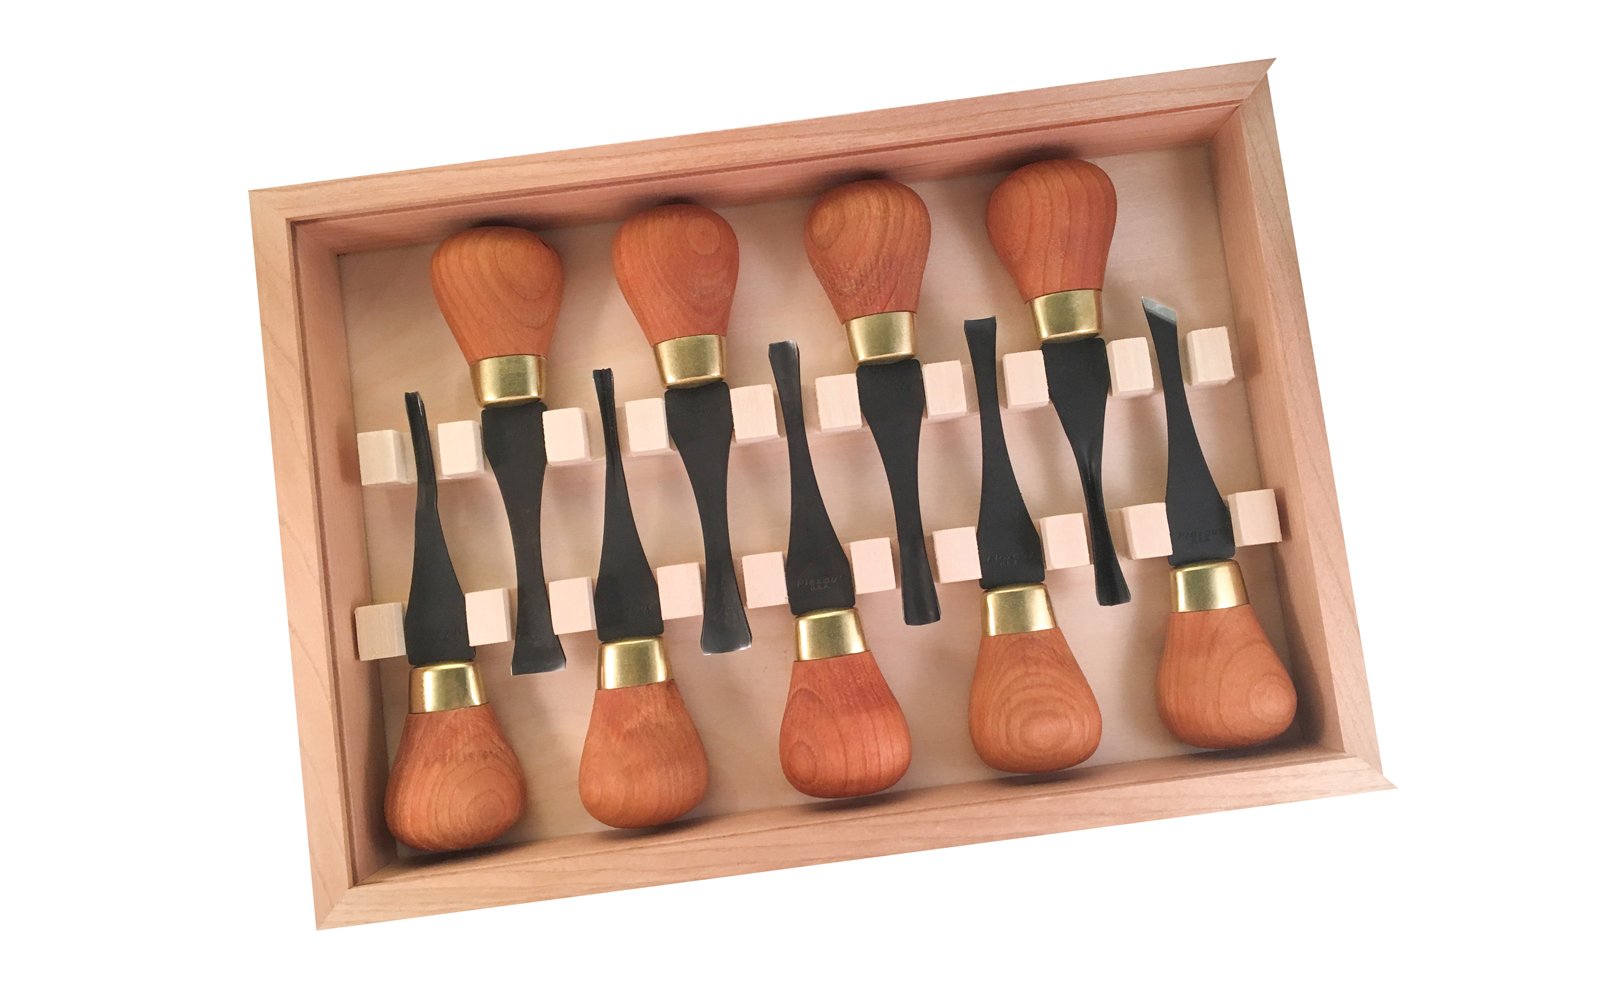 Flexcut Premium Deluxe Palm Carving Set ~ FRP405 - 9-piece set - #2 x 5/16” (8mm), #3 x 3/8” (9mm), #3 x 5/8” (16mm), #5 x 9/16” (14mm), #6 x 5/16” (8mm), #8 x 3/8” (10mm), #11 x 1/8”  - High Carbon Steel blades - Cherry wood handles & polished brass ferrules - Palm Carving Tool Set - Made in USA ~ 651646014052